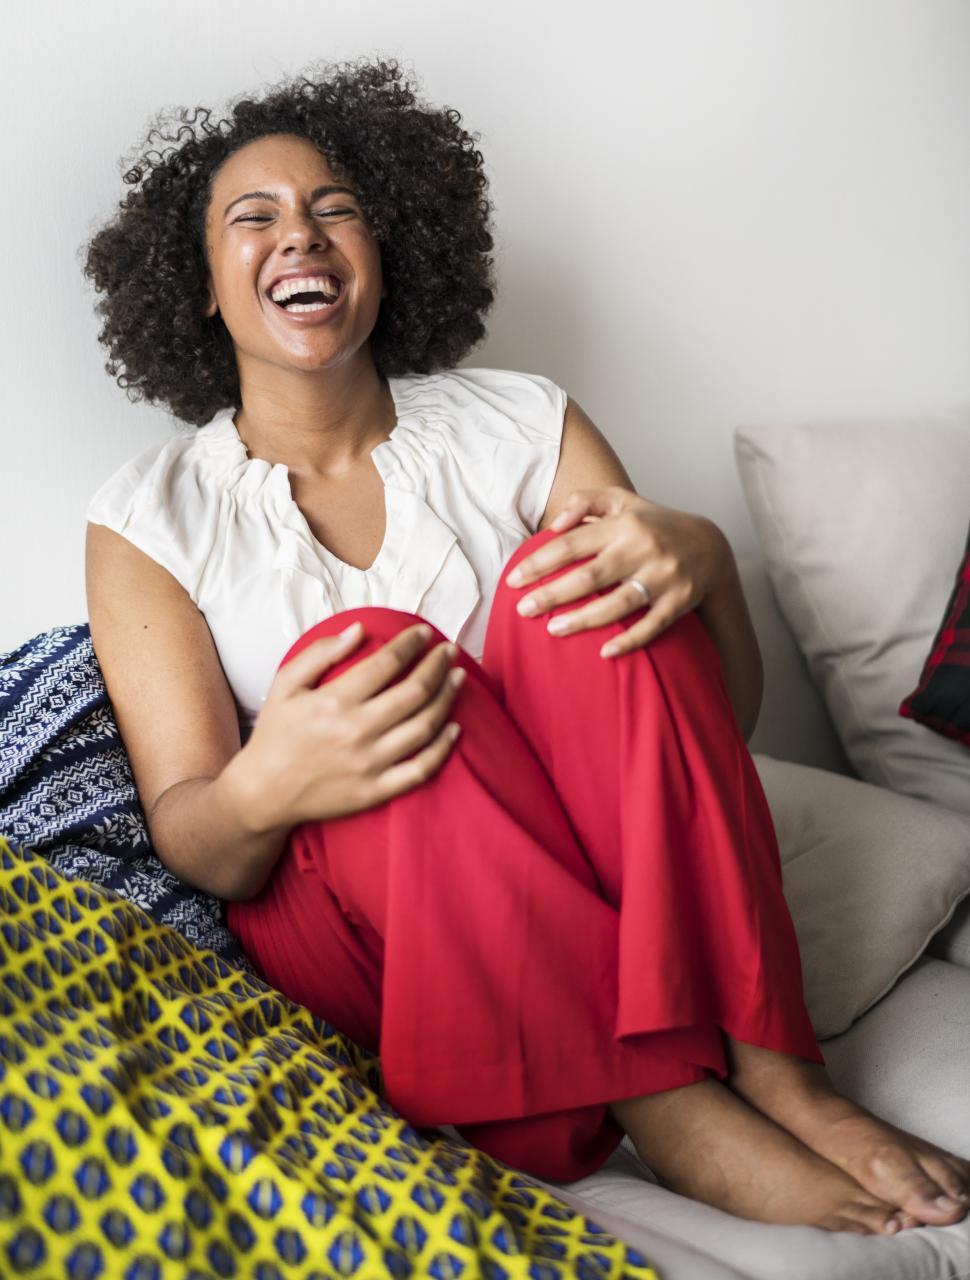 Free Image of A young African ethnicity woman with curly hair laughing 